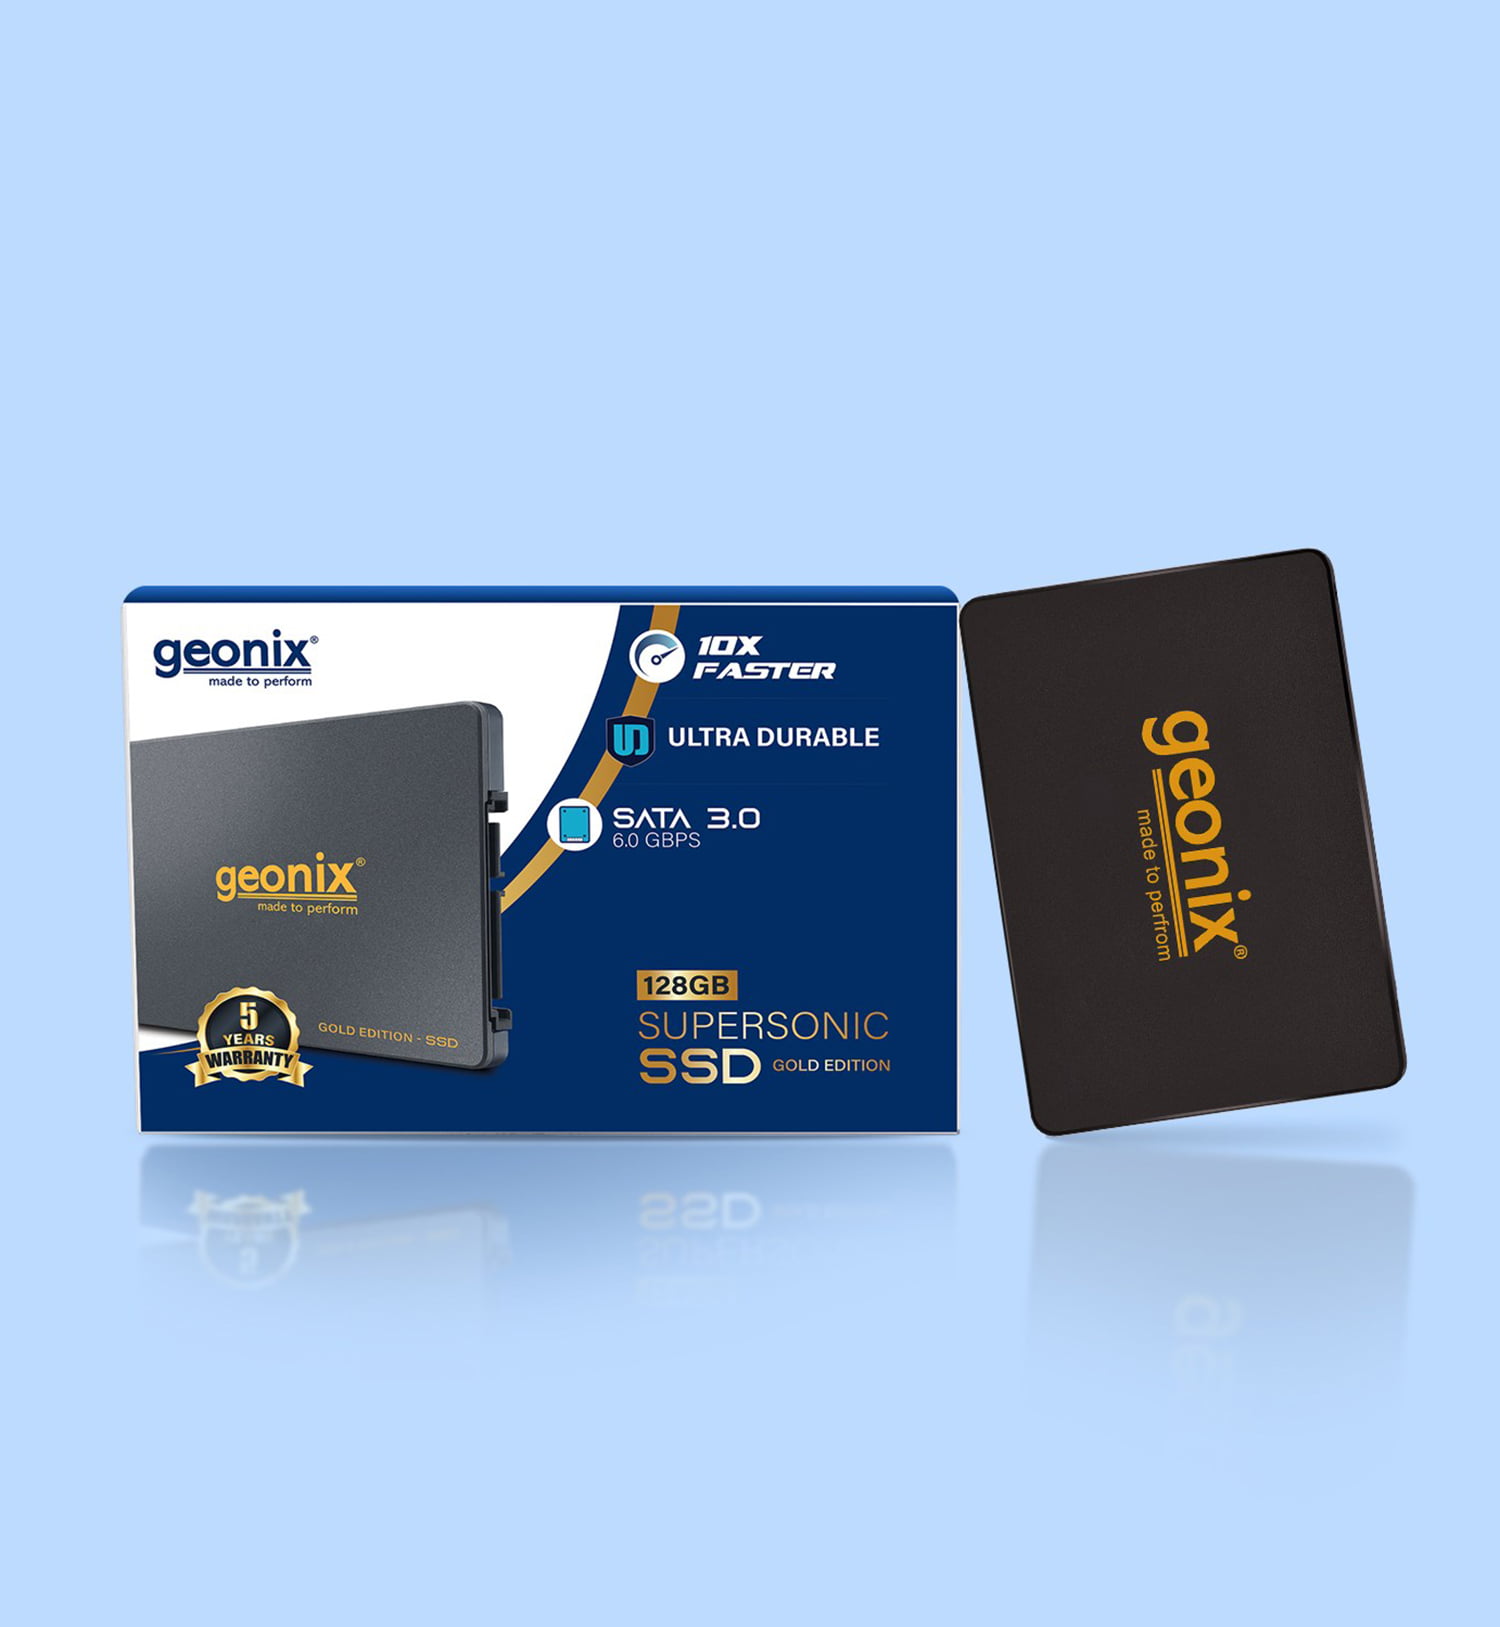 Geonix 128GB Supersonic SSD Gold Edition